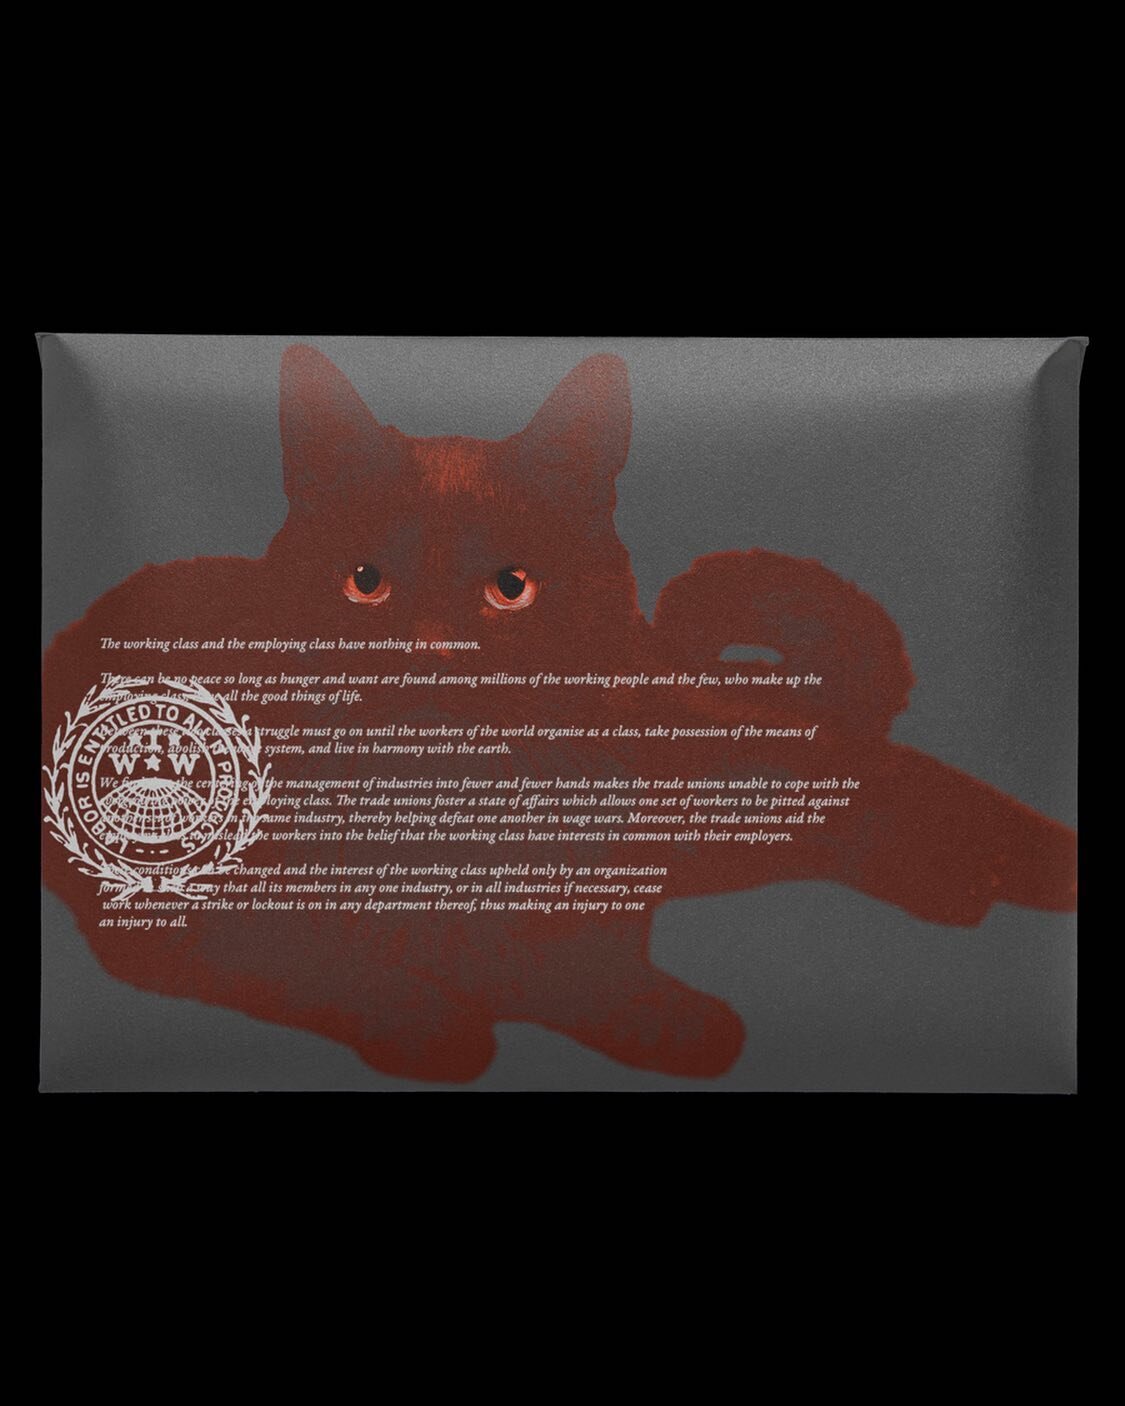 ℒ𝒶𝒷𝑜𝓇 𝒟𝒶𝓎 &laquo;𝒜𝓂𝑒𝓇𝒾𝒸𝒶𝓃 𝓂𝒶𝓎𝒹𝒶𝓎&raquo; 
&bull;
&bull;
&bull;
[black background with horizontal mail package/magazine cover in grey (@blkmarket mock-up!) with a maroon cat (an inversion of the last post) set to fit most of the ar